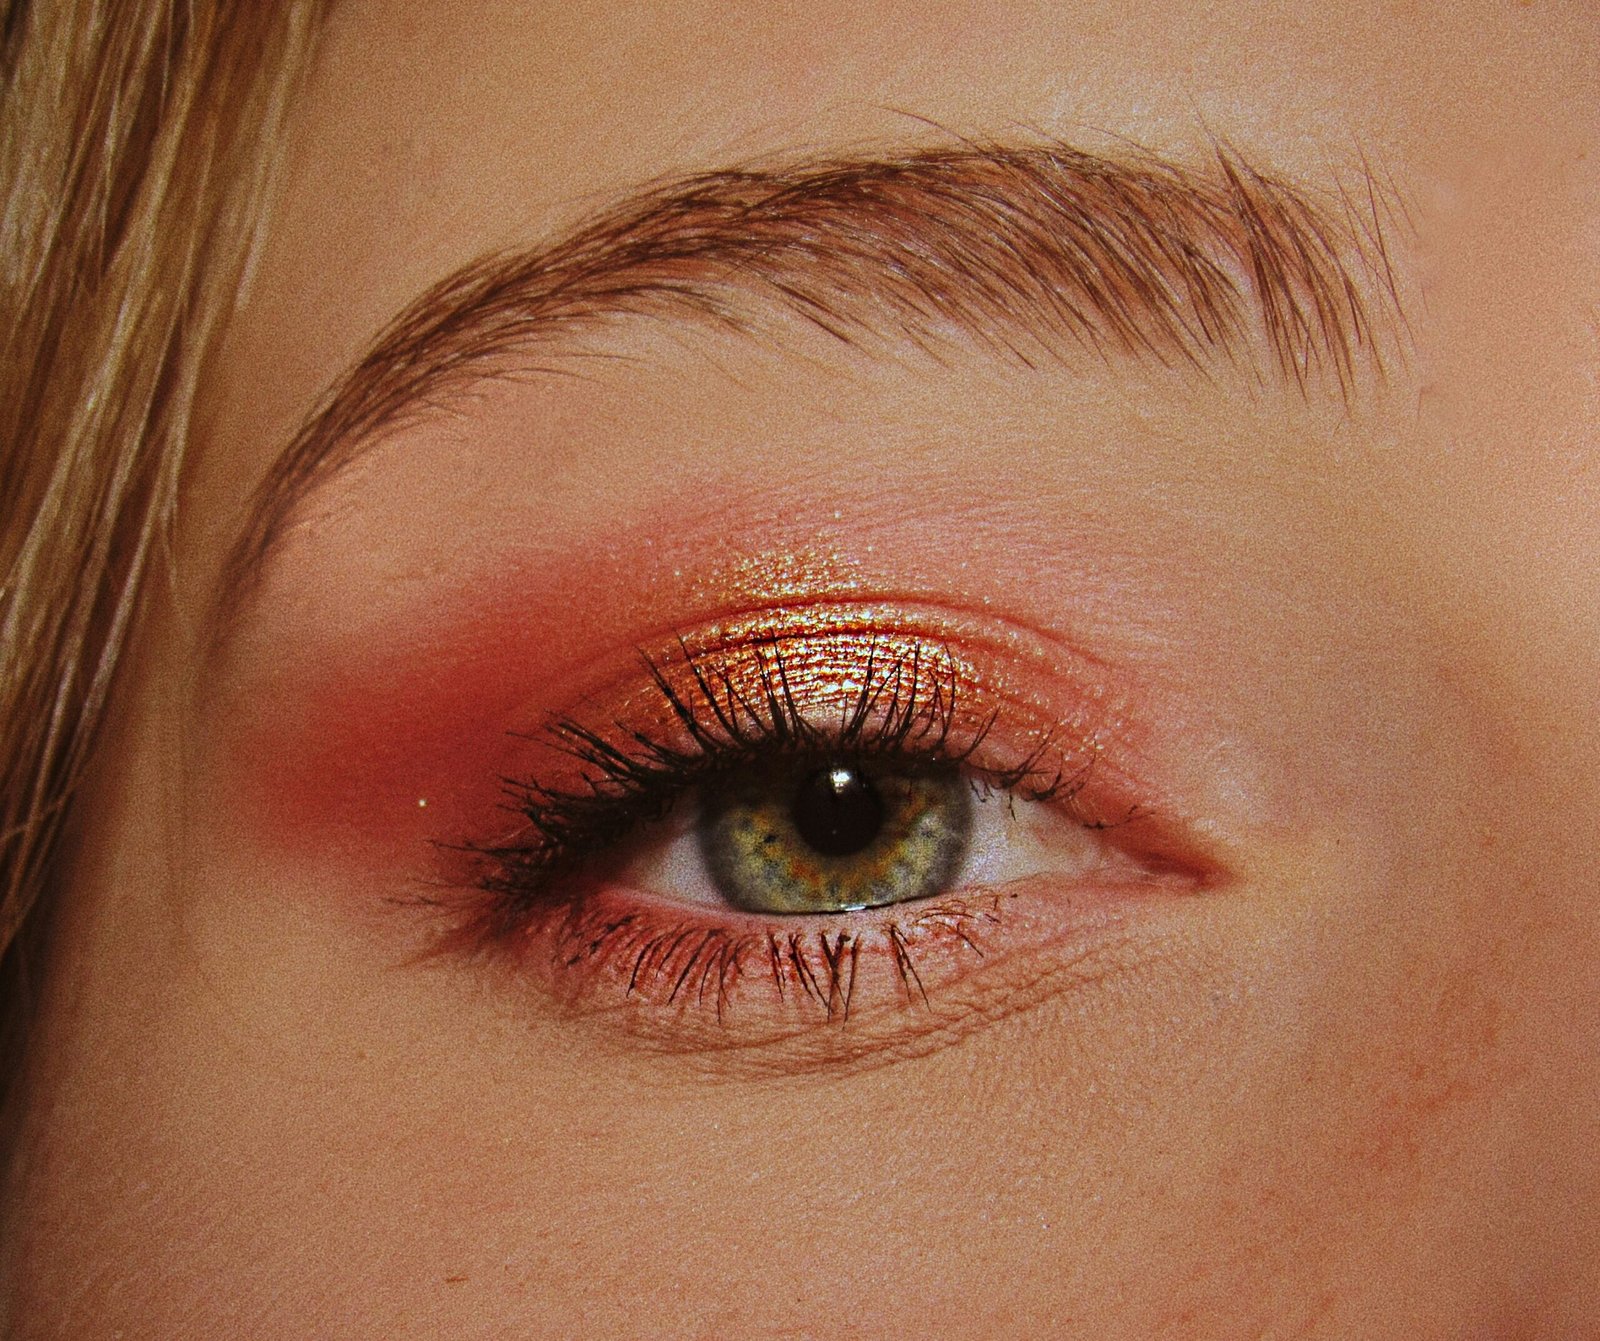 Can I Use Bright Colors In My Makeup If Im Over 50?